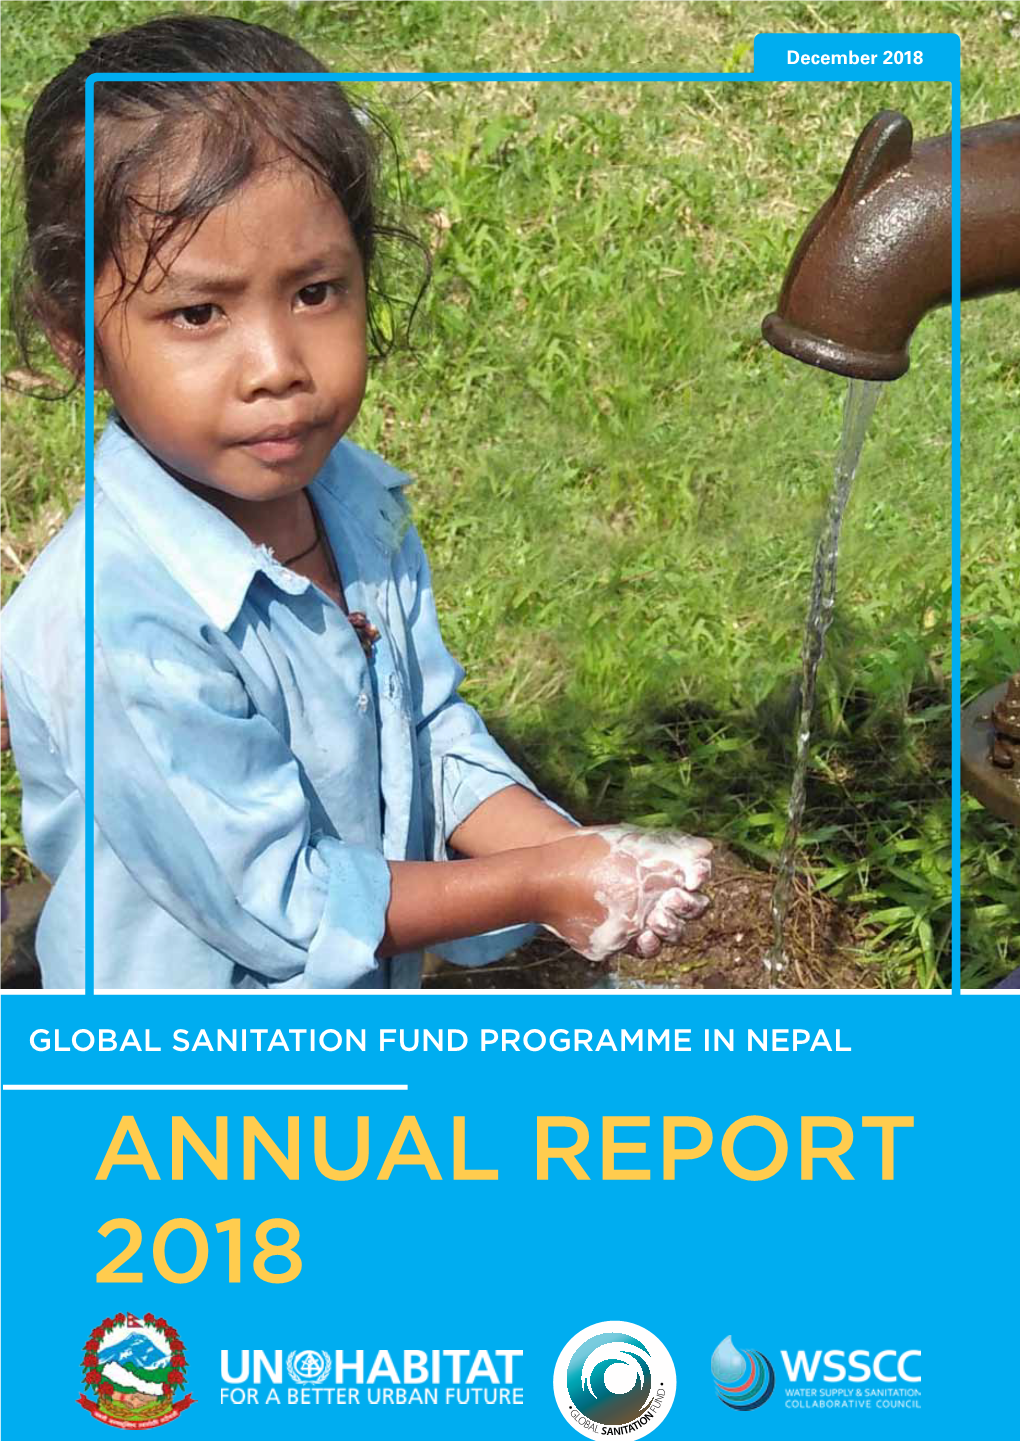 Annual Report 2018 Global Sanitation Fund Programme in Nepal